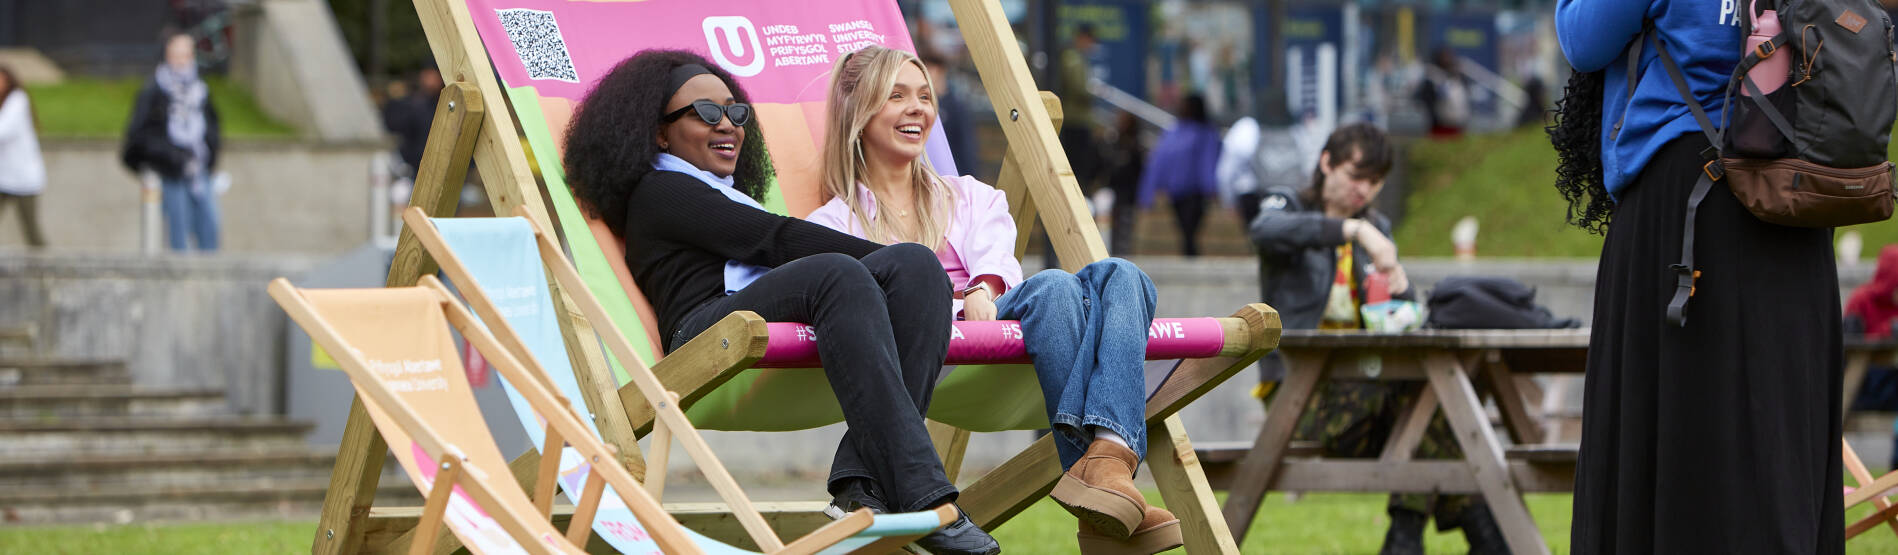 Students on a giant deck chair at open day